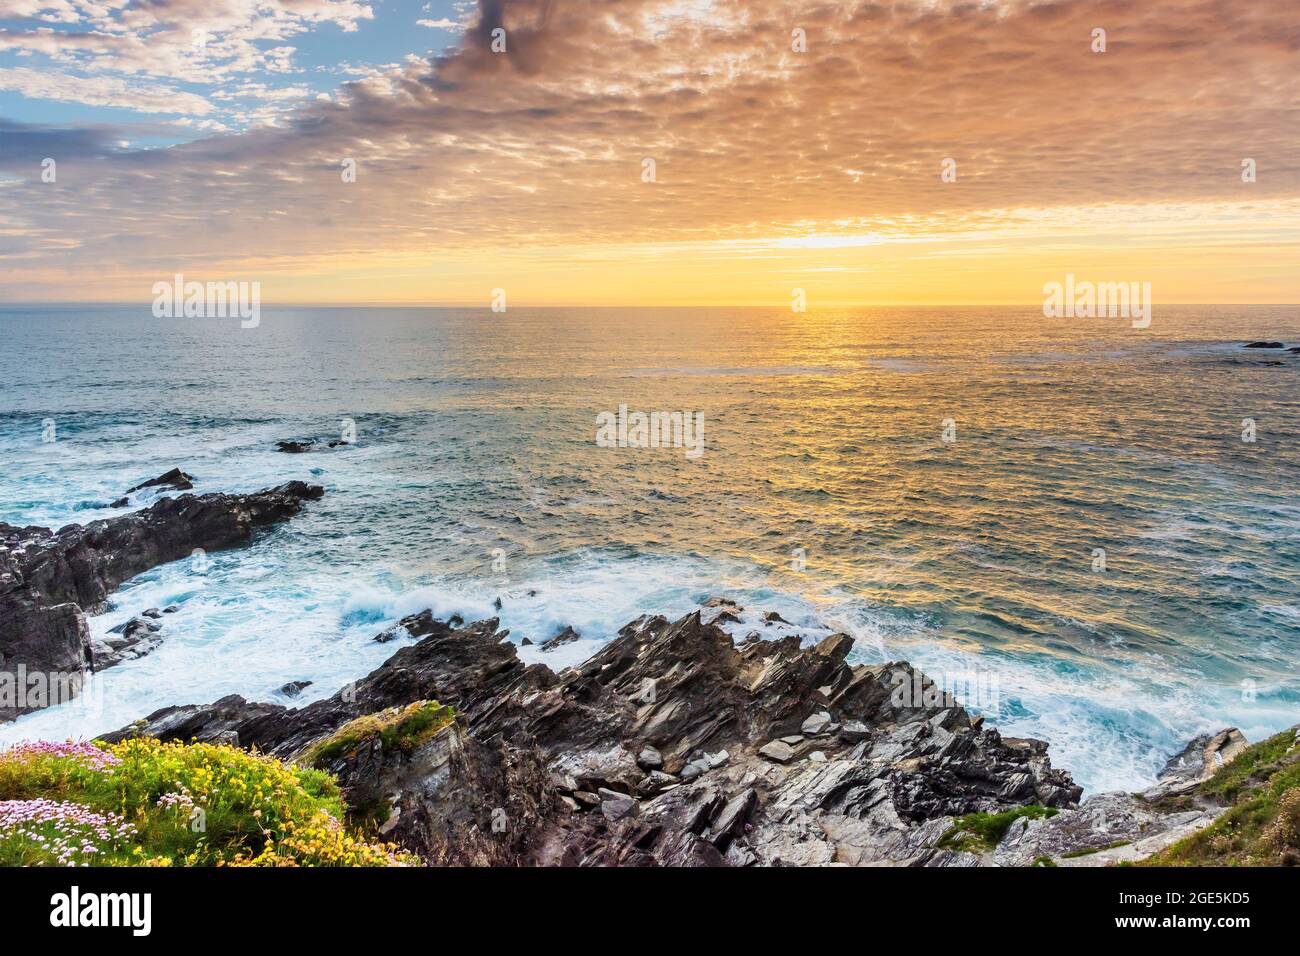 A spectacular sunset over the Celtic Sea seen from the coast of Newquay in Cornwall. Stock Photo